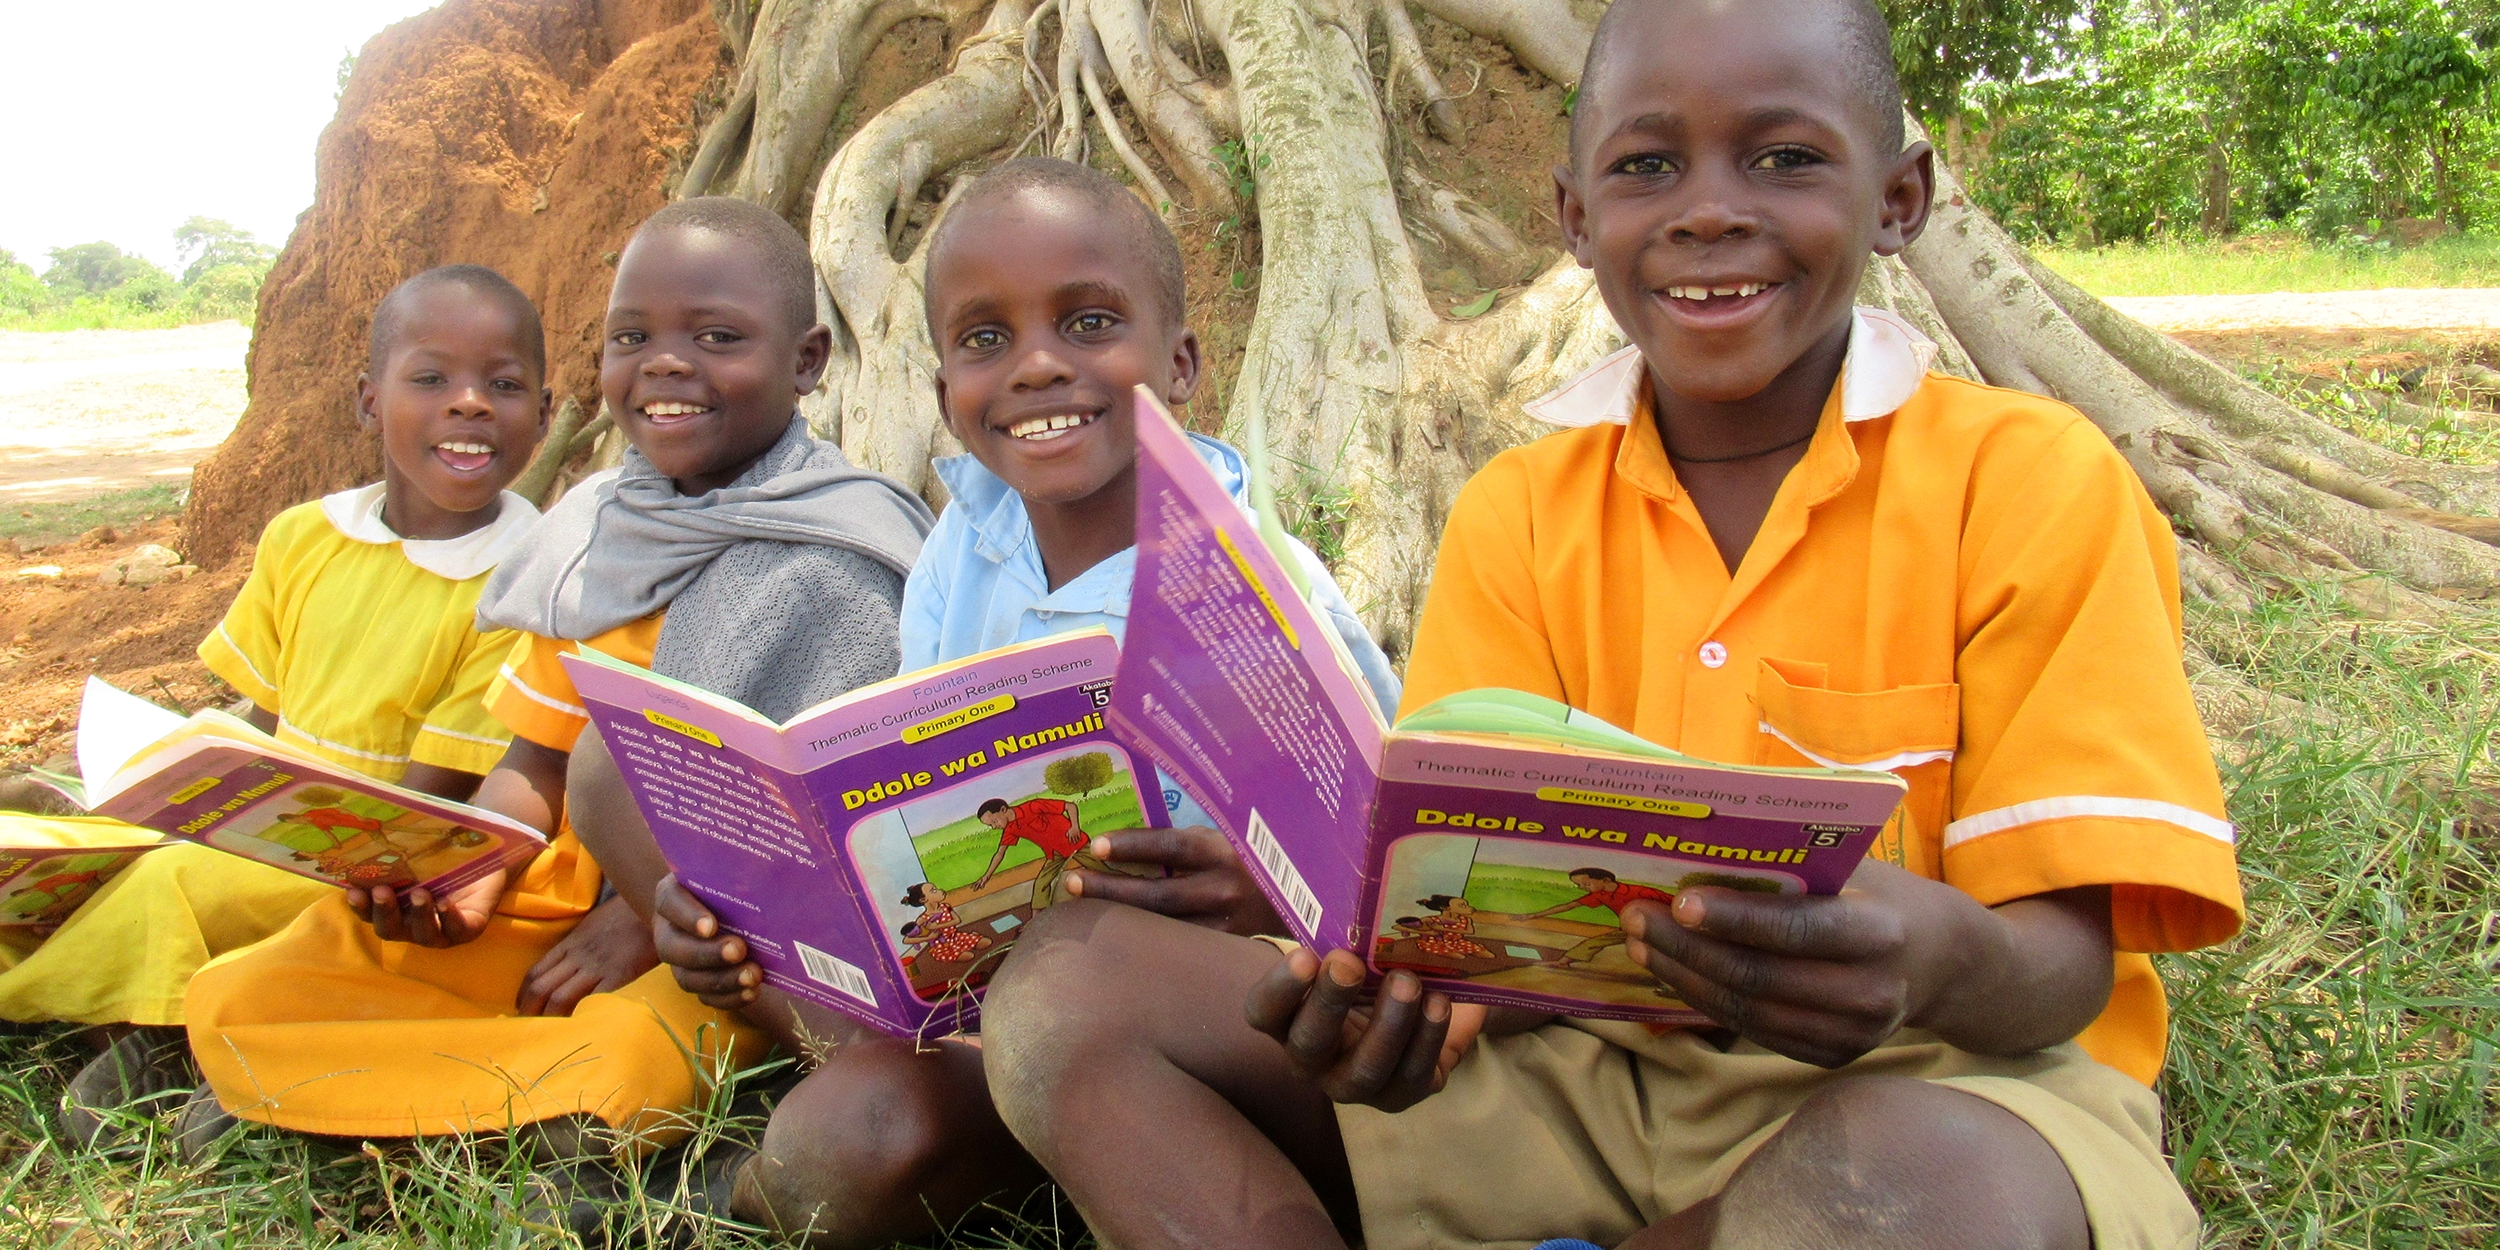 Four children sit cross-legged on the grass near their primary school in Uganda. Each child holds a colorful picture book in their hands. The children are dressed in school uniform shirts and are smiling. Through child sponsorship, Save the Children supports education programs in Uganda that provide school children with books.  Photo credit: Save the Children, Oct 2018.